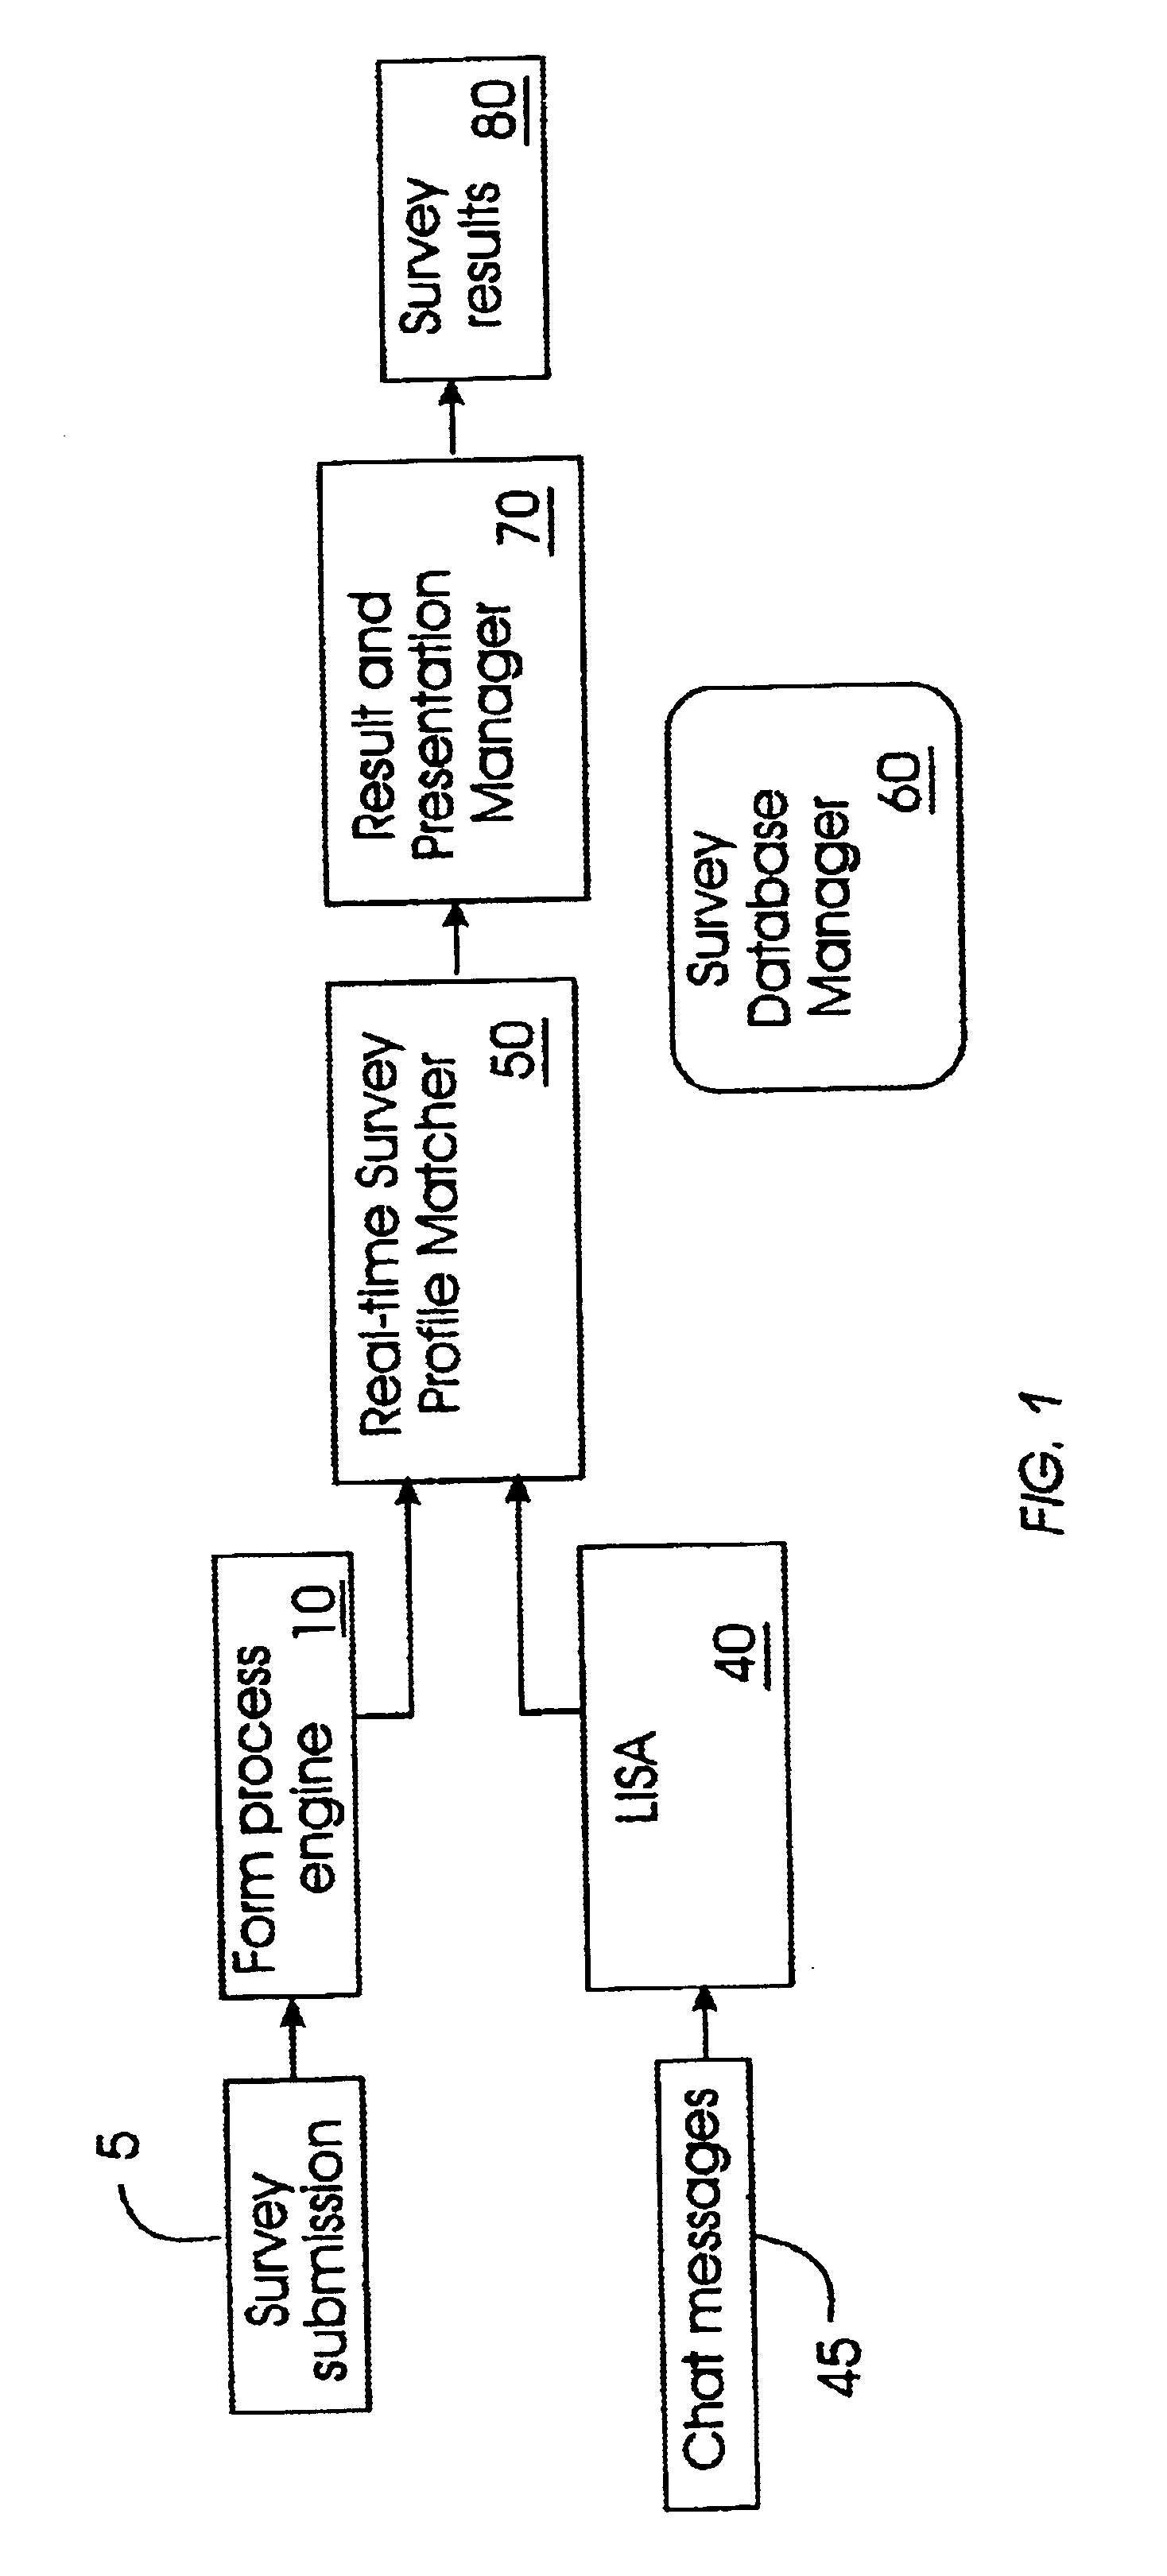 System and method for automatically conducting and managing surveys based on real-time information analysis